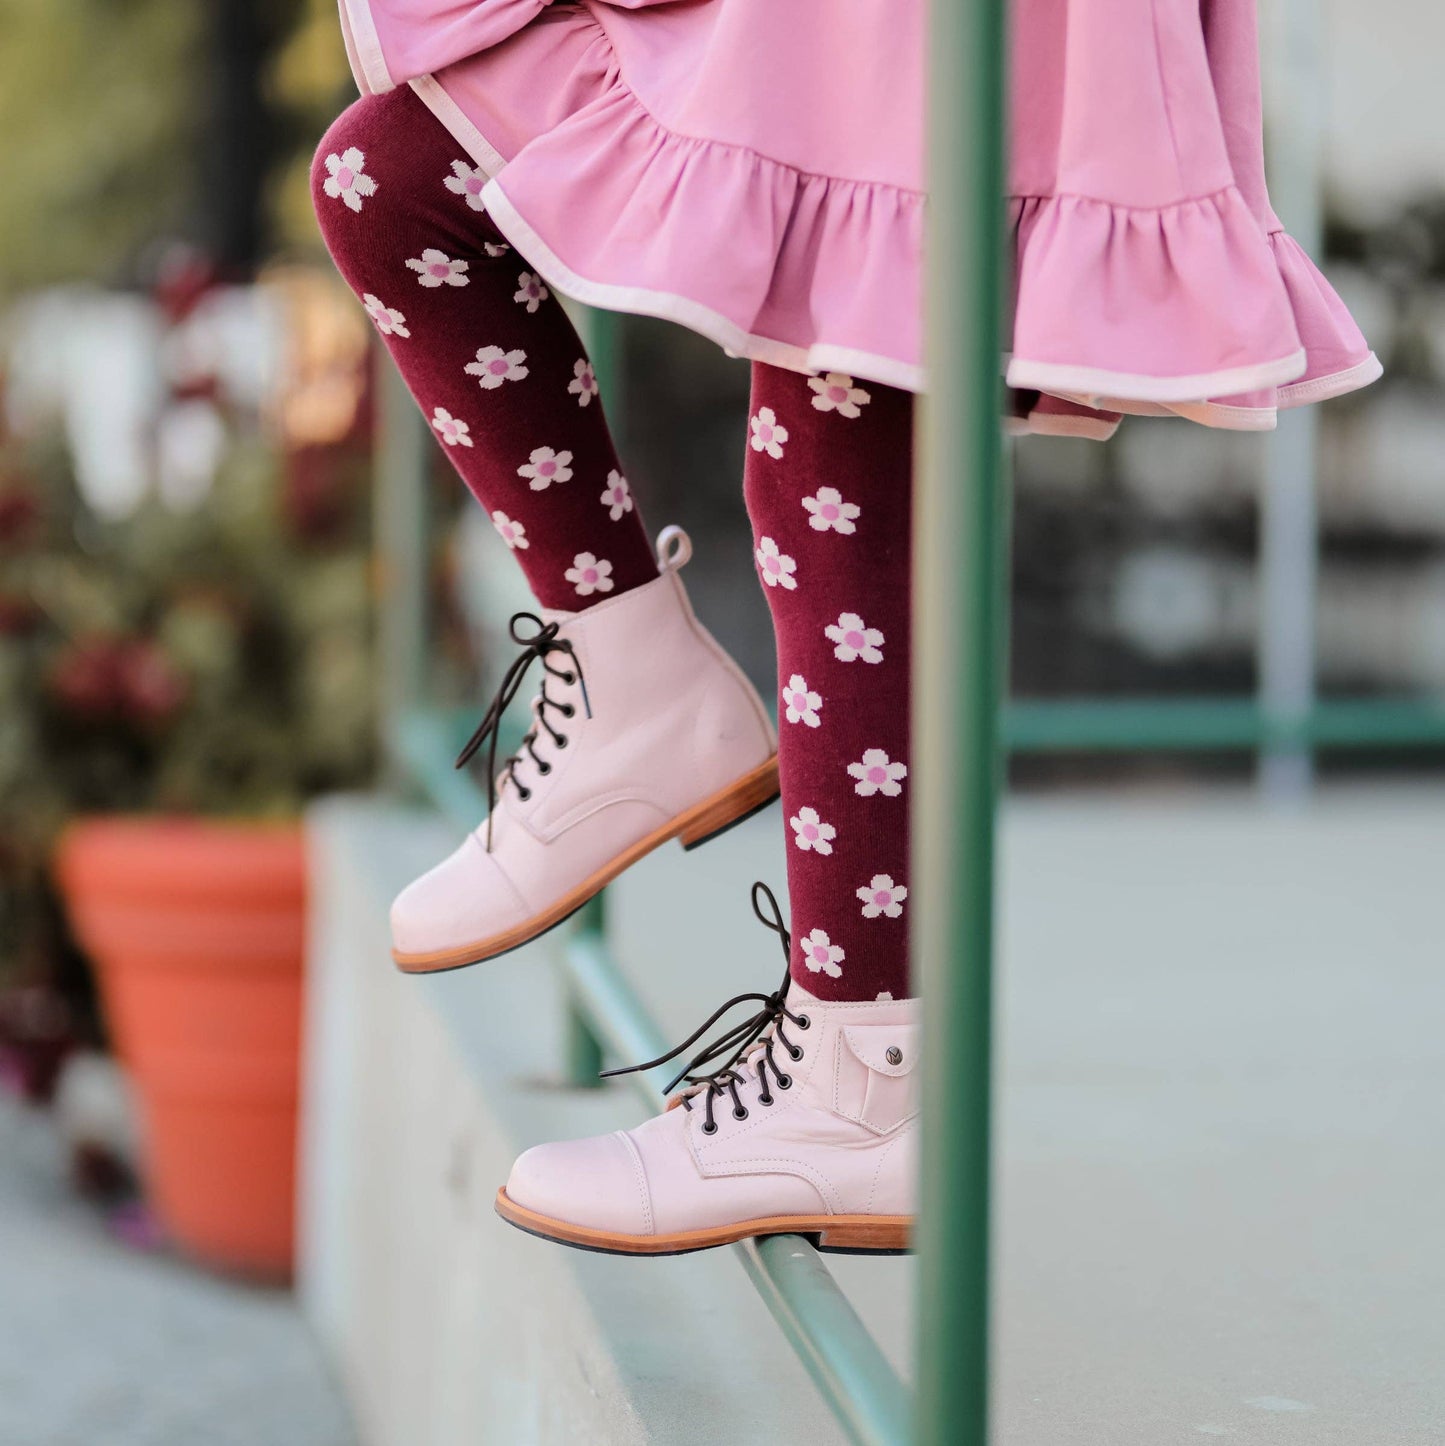 Burgundy Flower Knit Tights: 3-4 YEARS